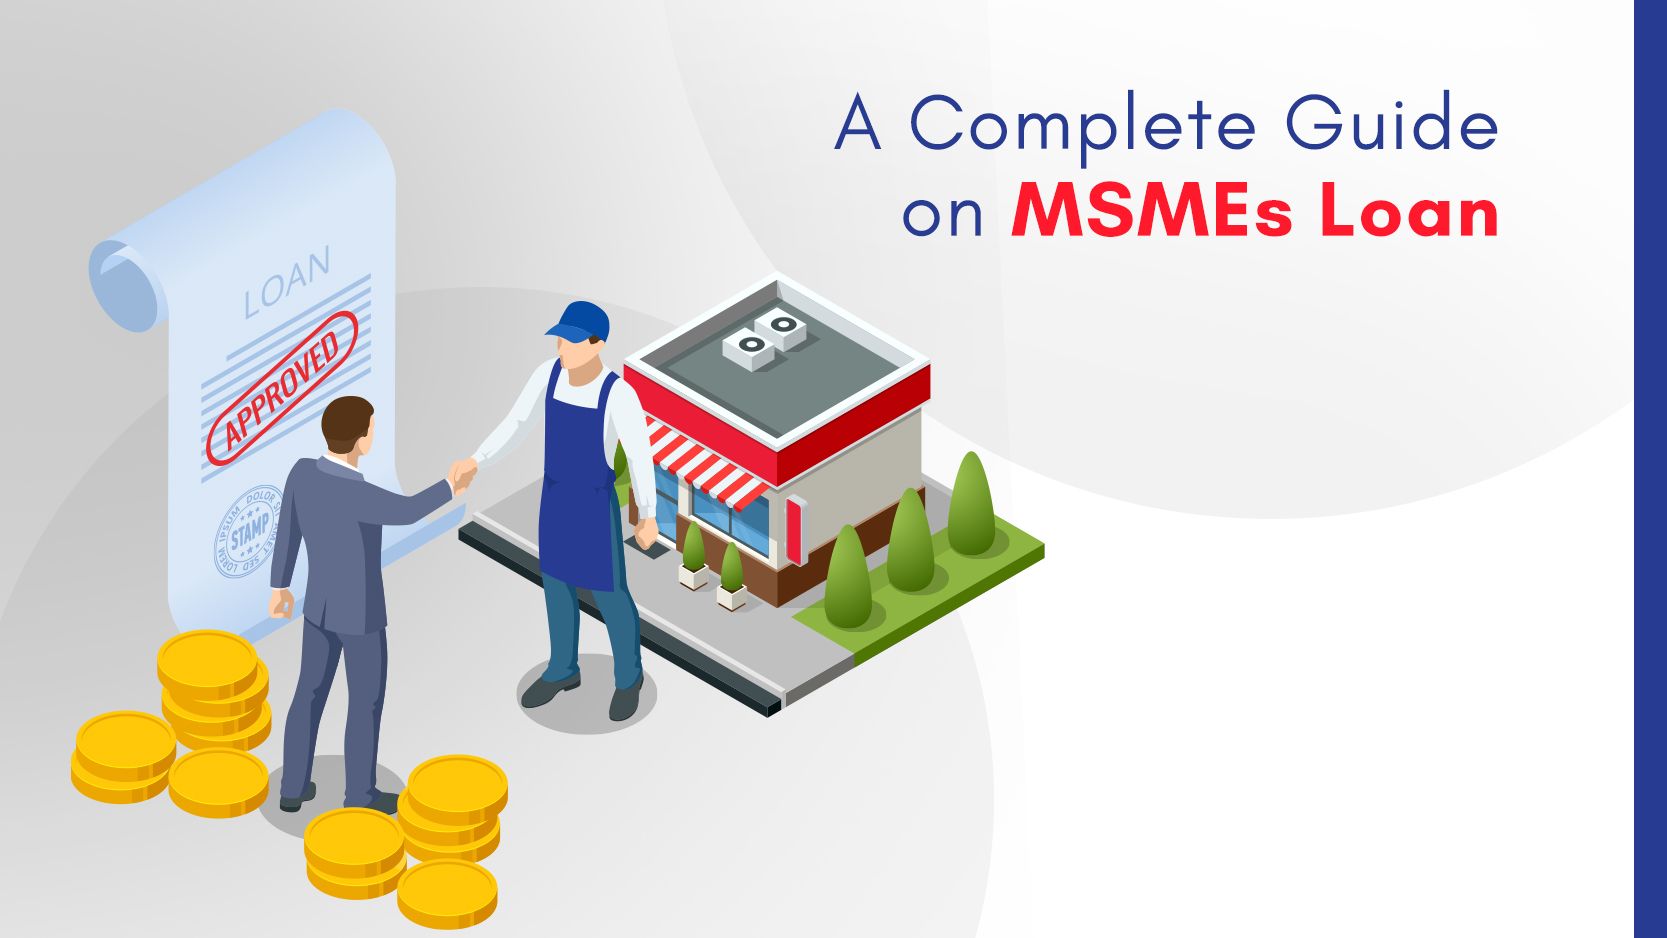 A Complete Guide
on MSMEs Loan